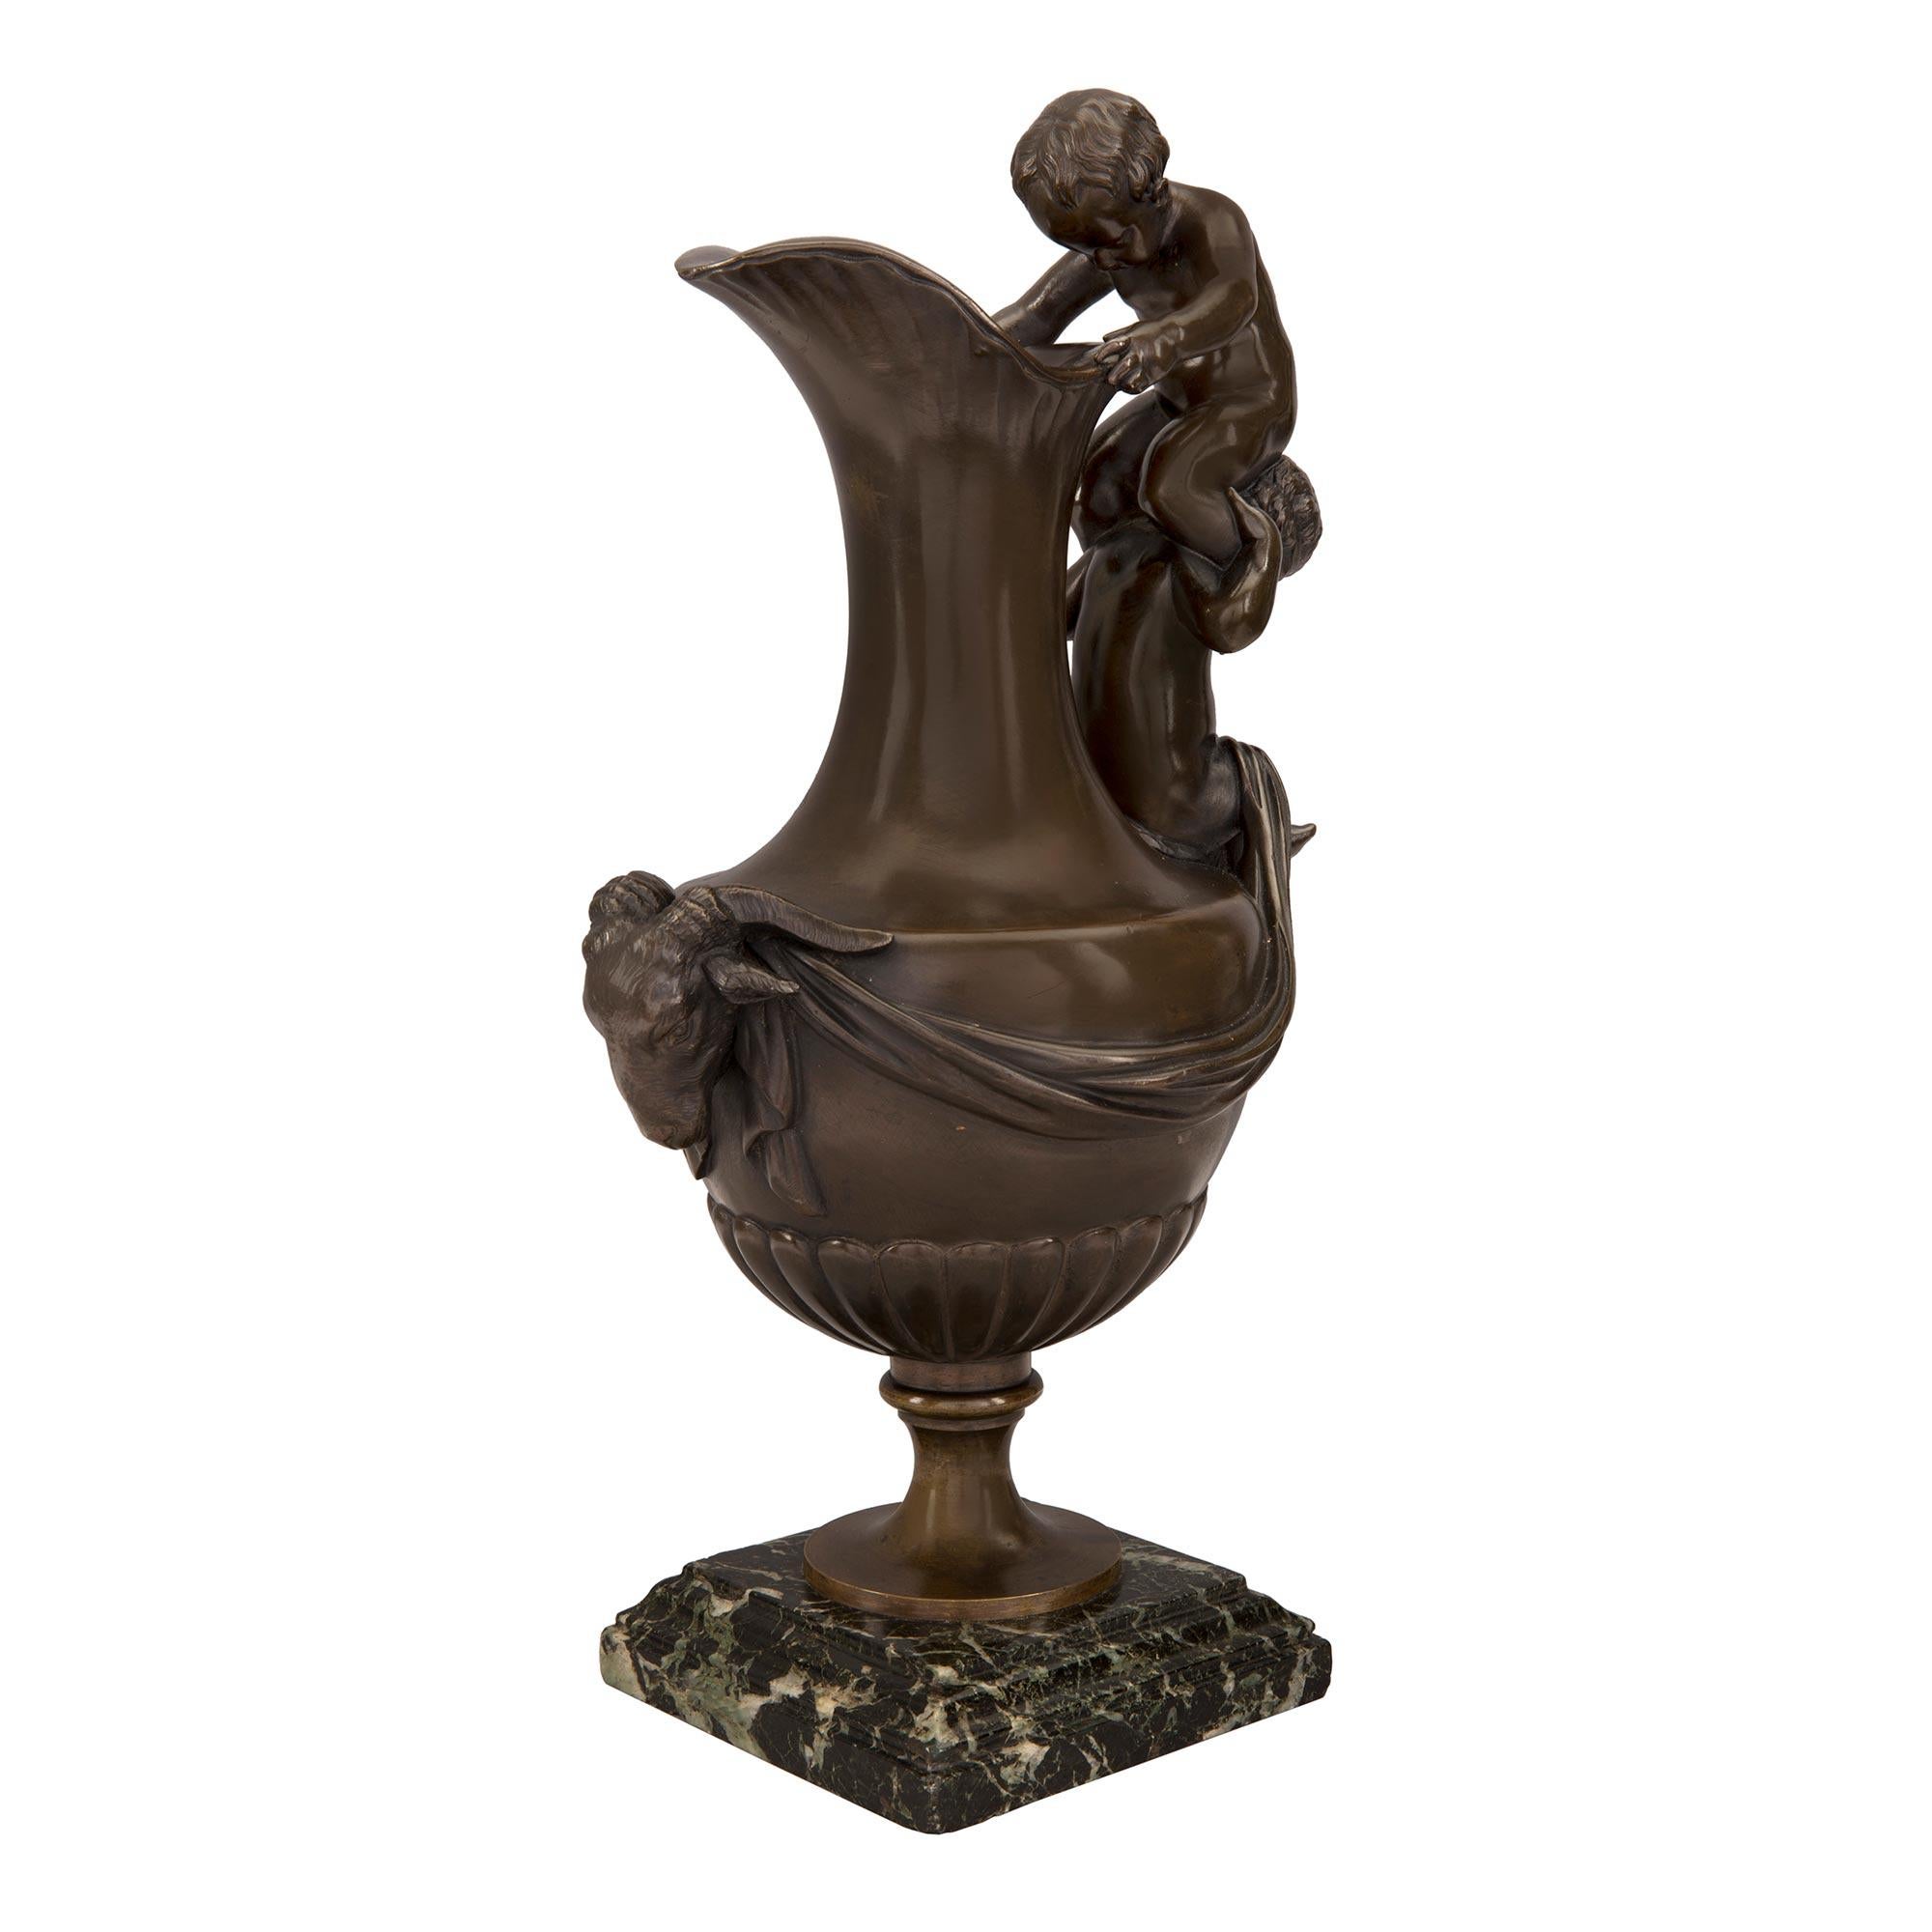 A wonderful and very decorative pair of French 19th century patinated bronze ewers. Each bronze ewer is raised by a Vert Maurin marble base with a mottled border. Above the socle pedestal is the elegantly shaped body with a reeded design and a